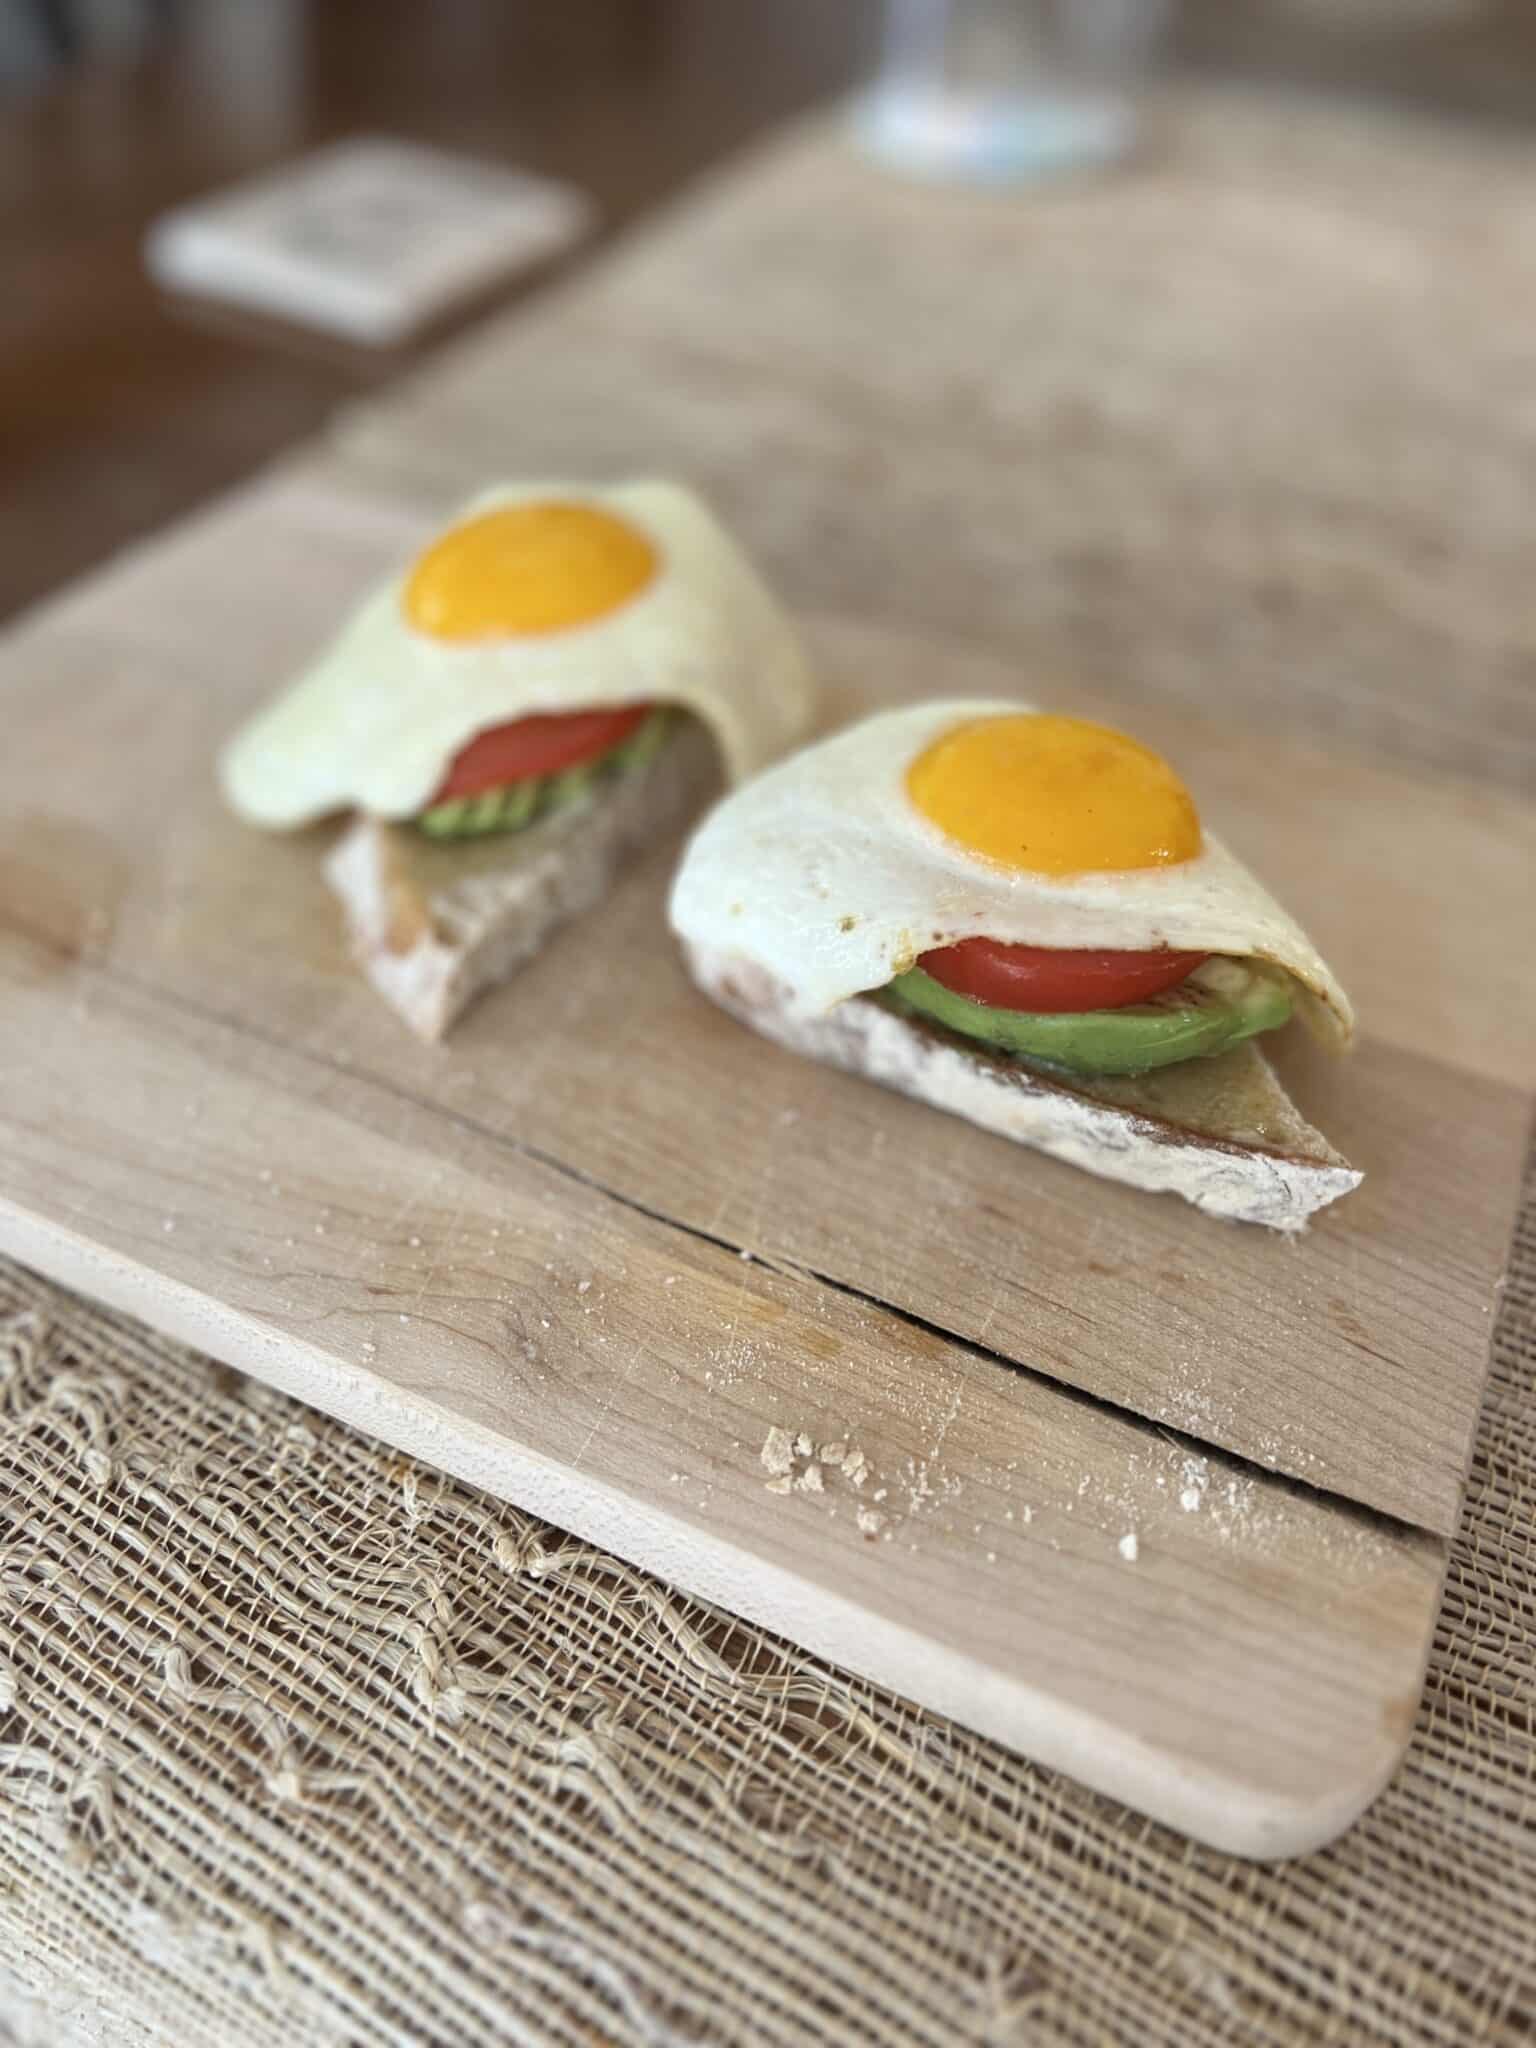 Sunny side up egg, tomato and avocado toast, sourdough toast, stilettos and diapers